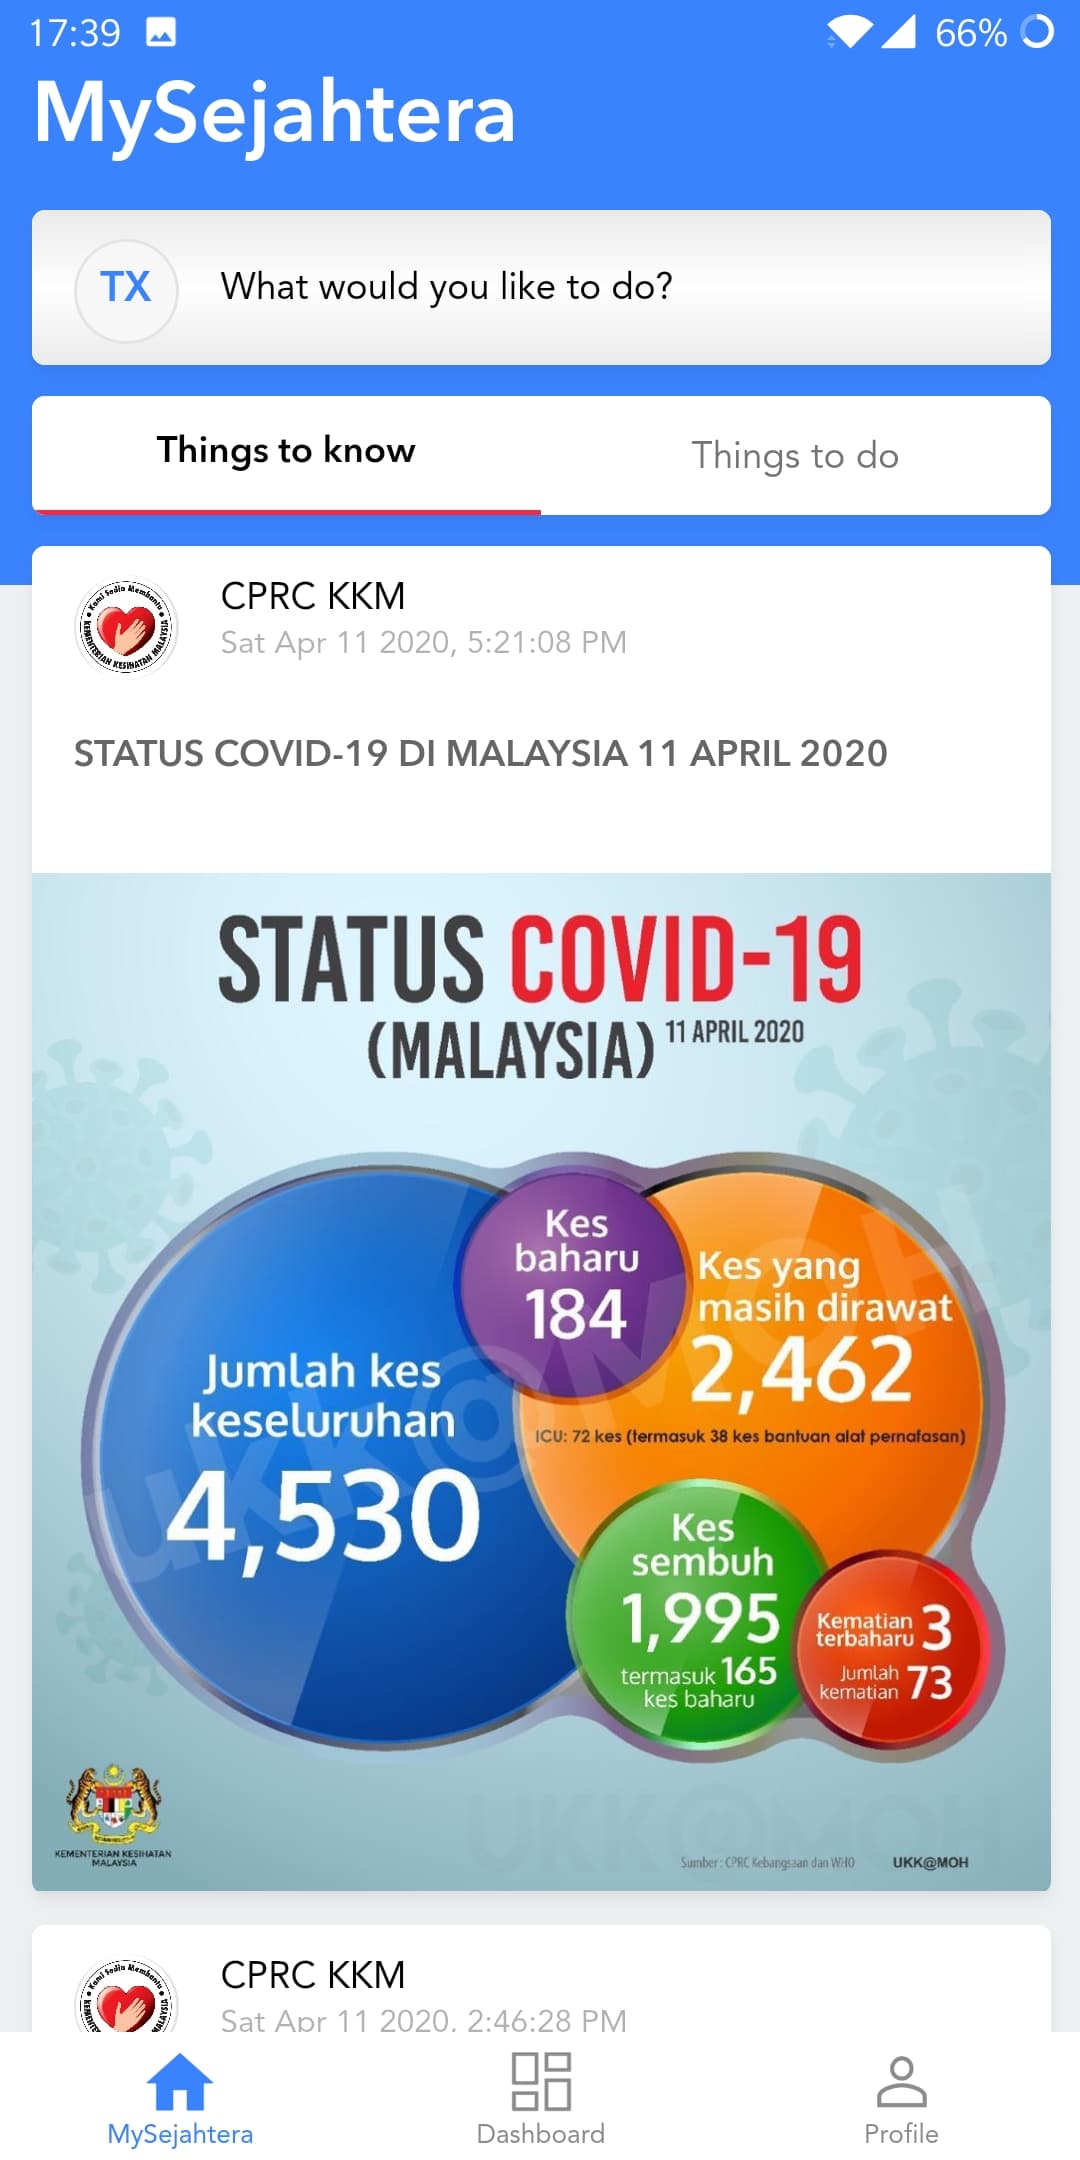 M'sian Government Developed Mysejahtera Mobile App For Citizens To Monitor Covid-19 Outbreak - World Of Buzz 1